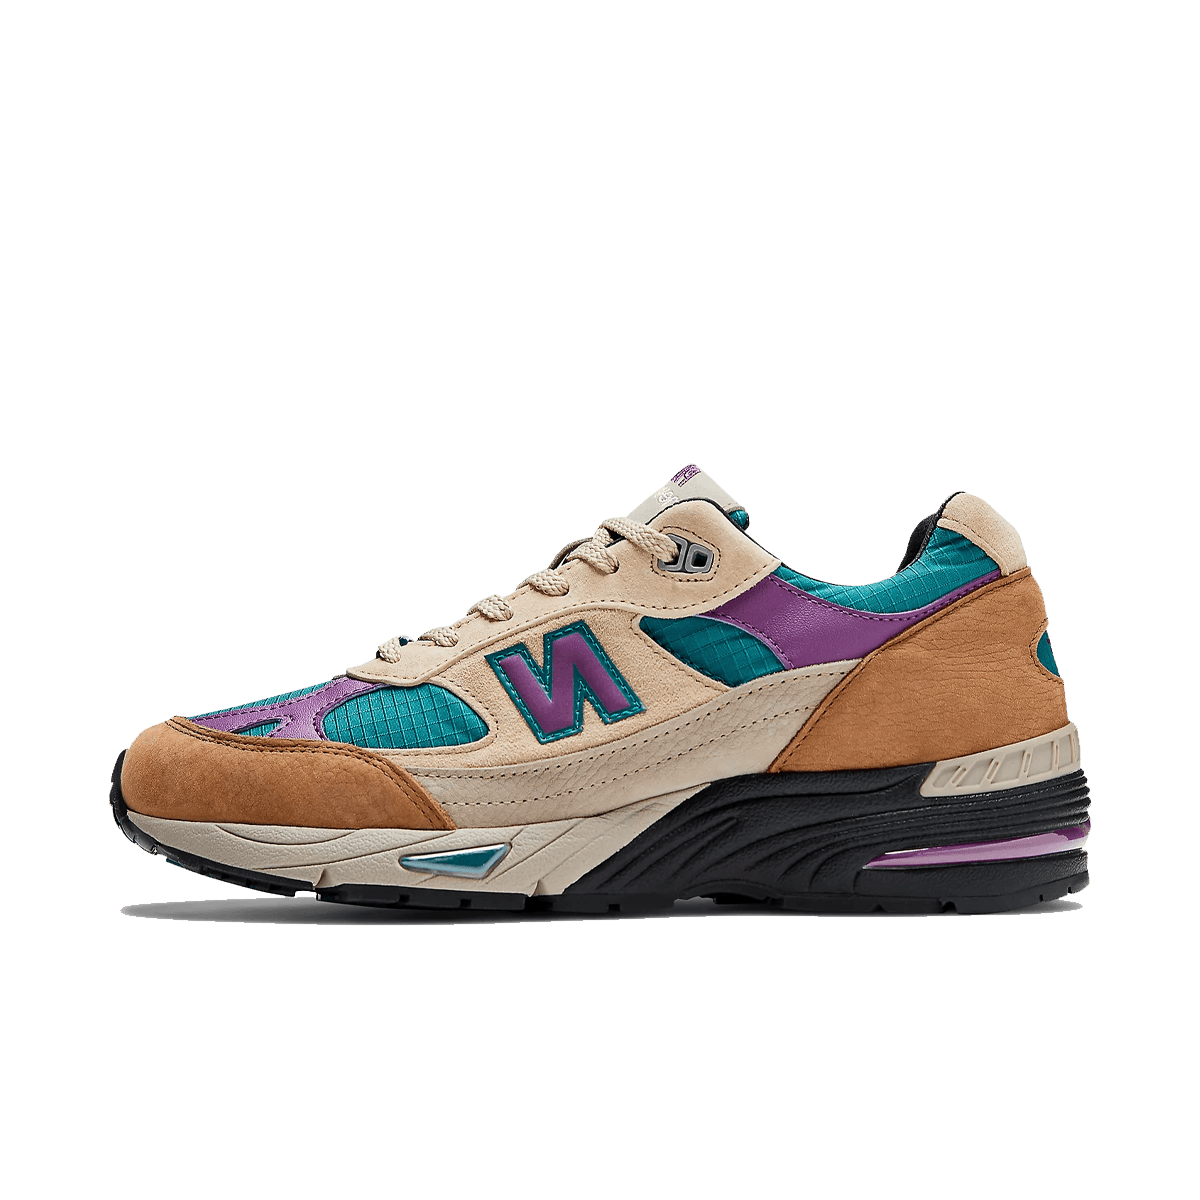 Palace x New Balance 991v1 'Taos Taupe' - Made in UK